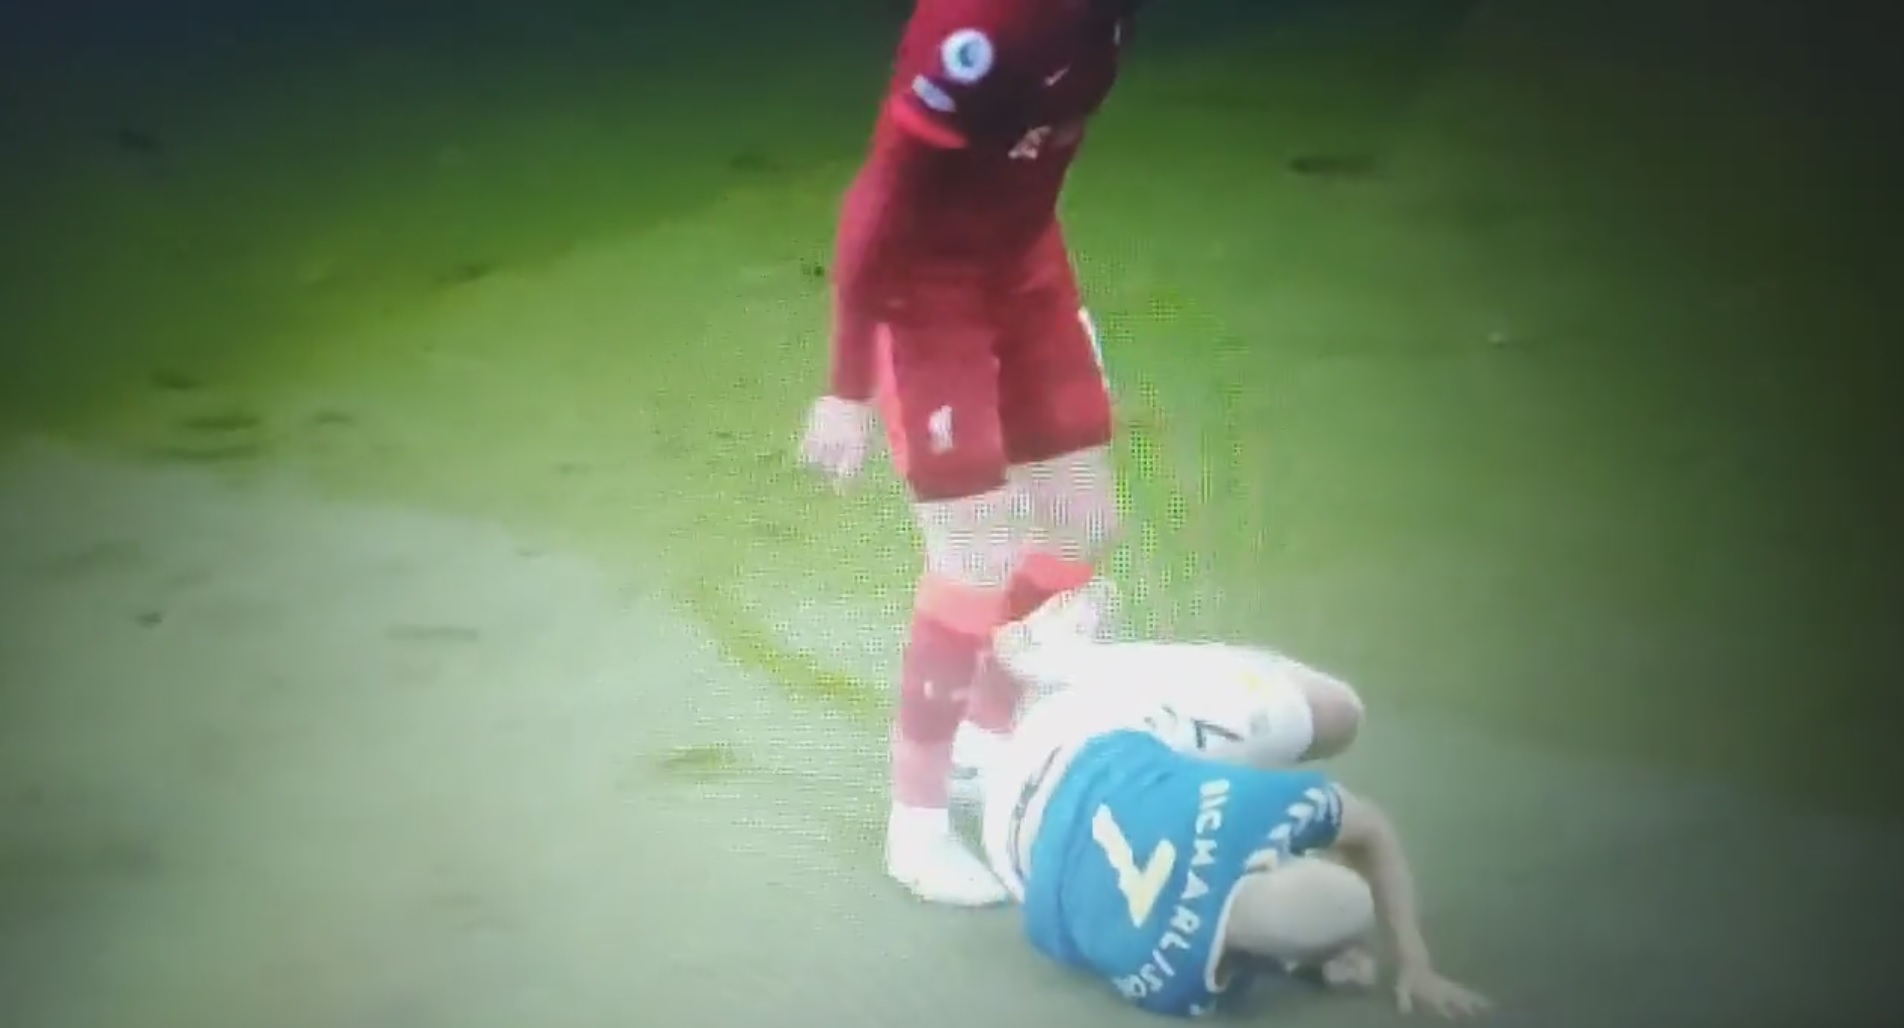 (Video) Richarlison lucky to have stayed on pitch after nasty studs-up challenge on Henderson